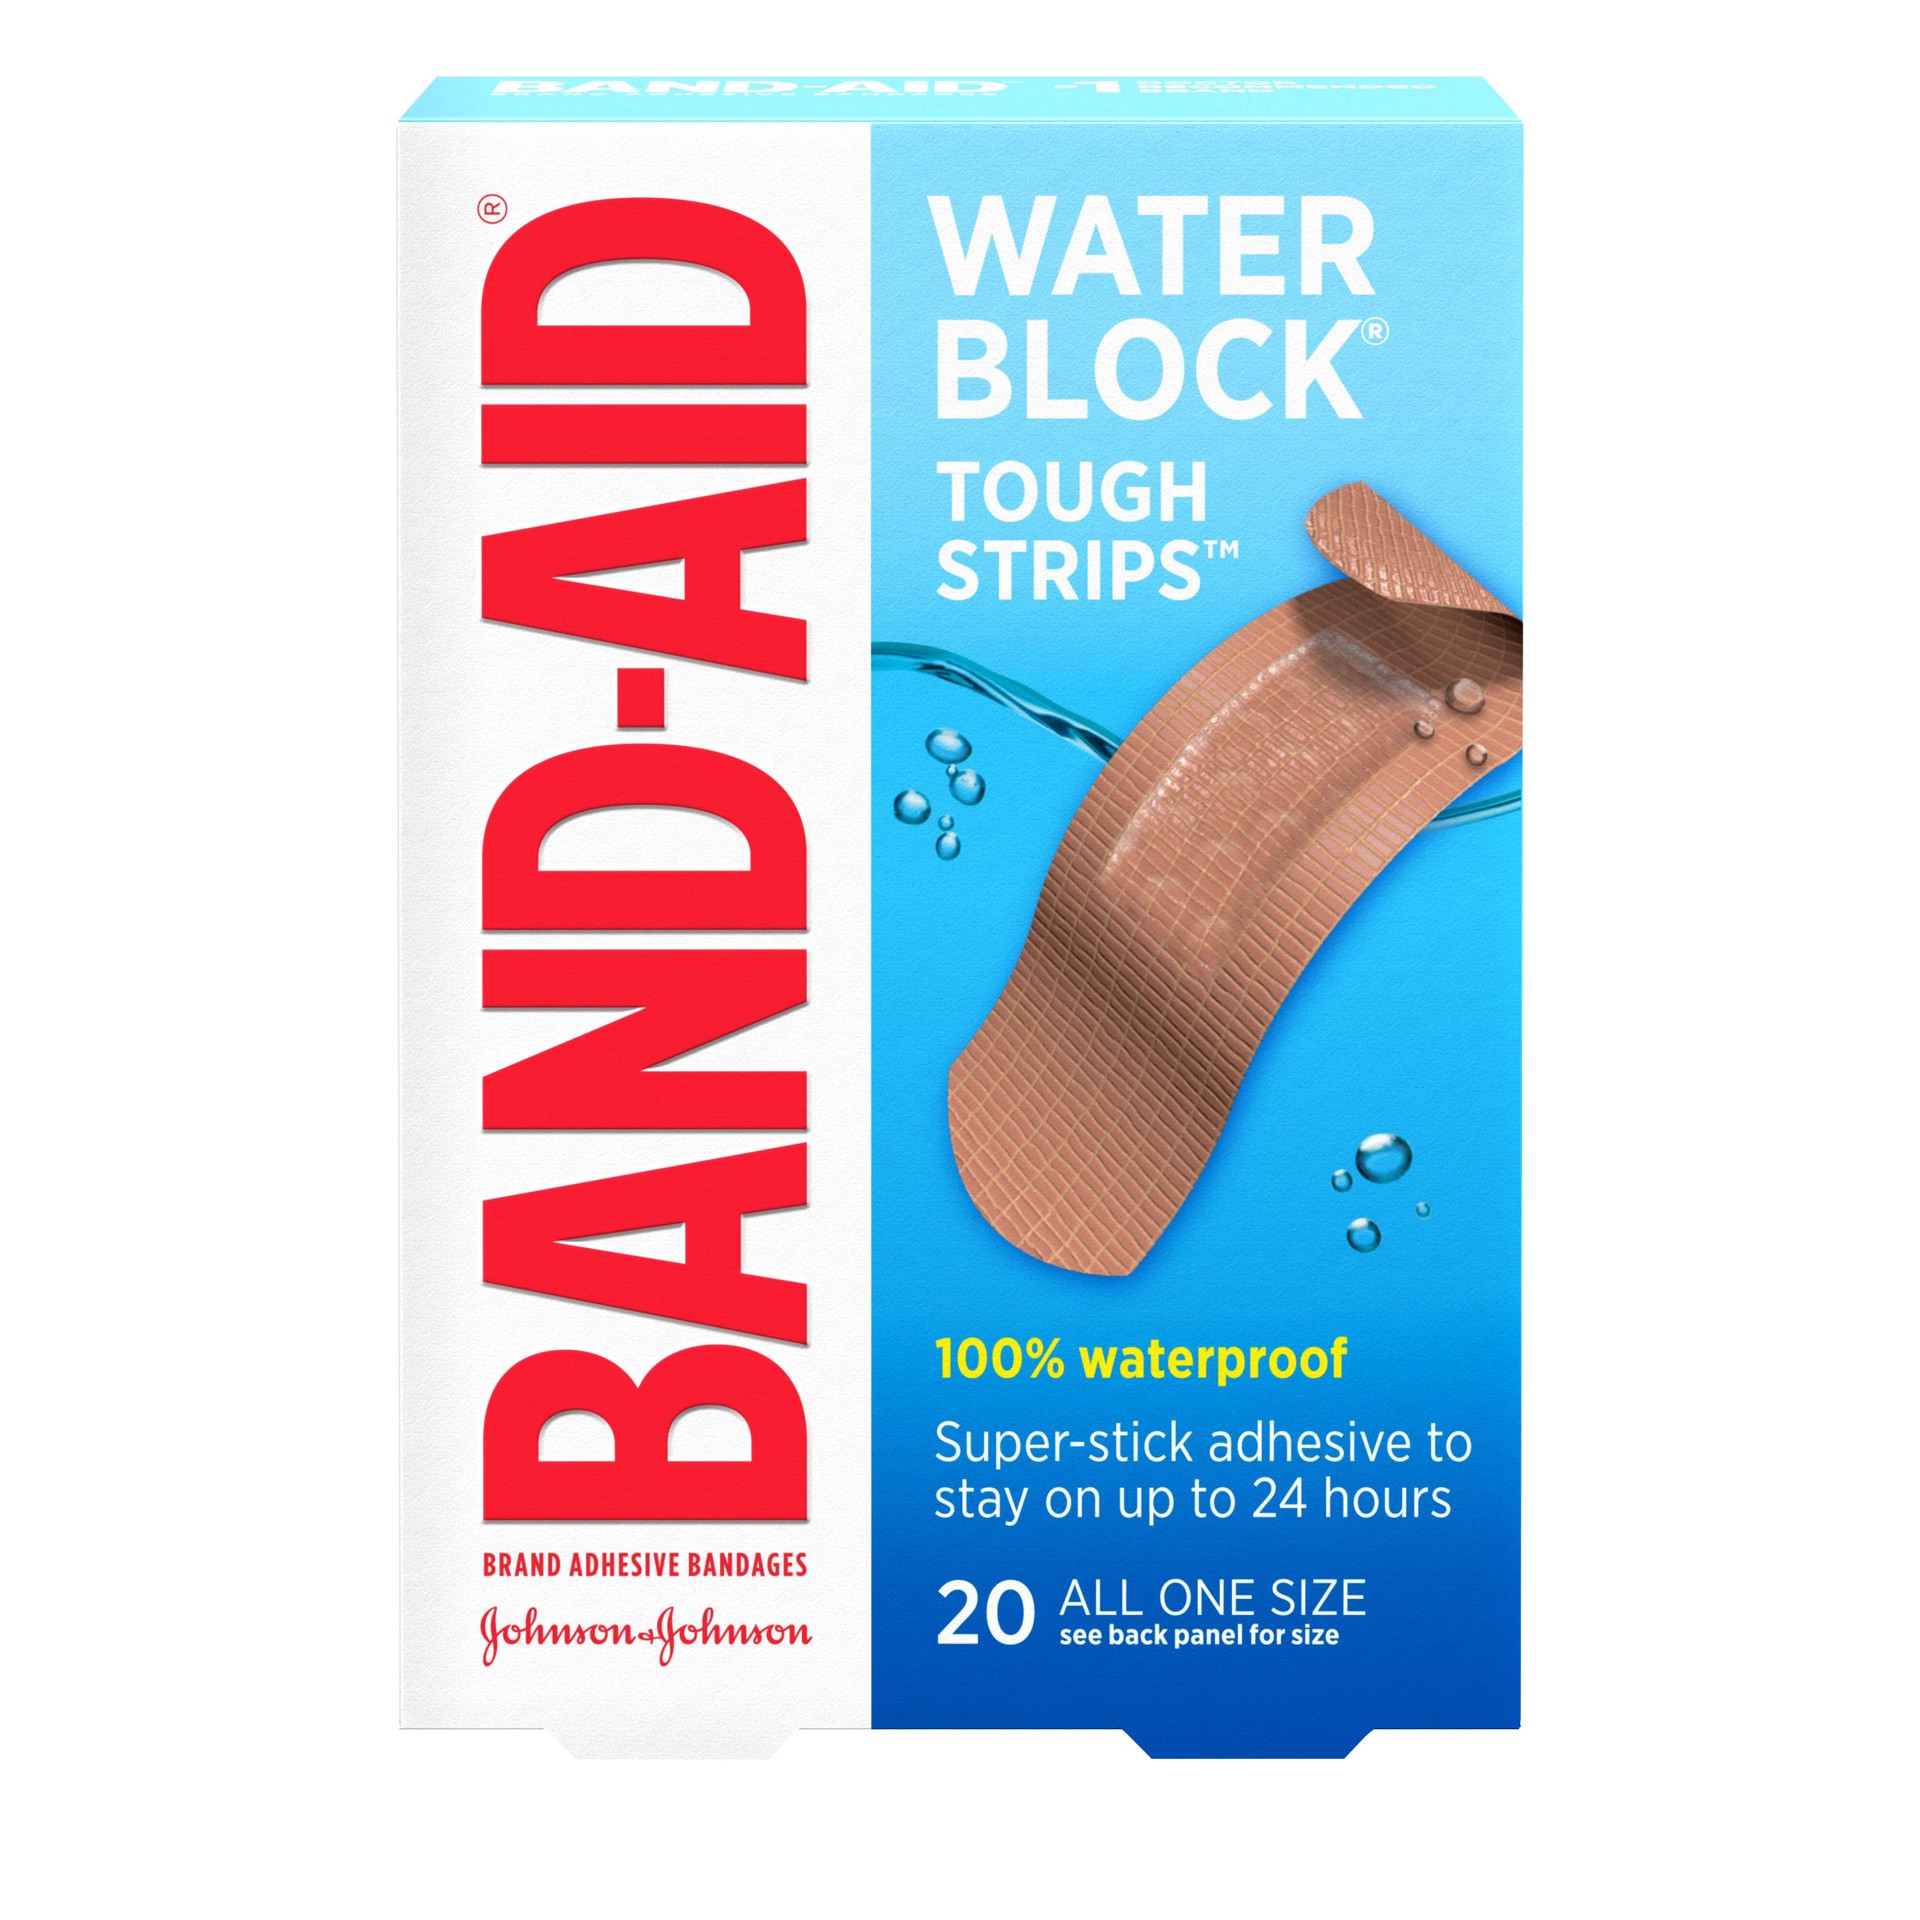 slide 1 of 10, BAND-AID Water Block Waterproof Tough Adhesive Bandages for First Aid Wound Care, Durable Waterproof Bandages to Protect Minor Cuts, Burns & Scrapes, Quilt-Aid Pad, One Size, 20 ct, 20 ct